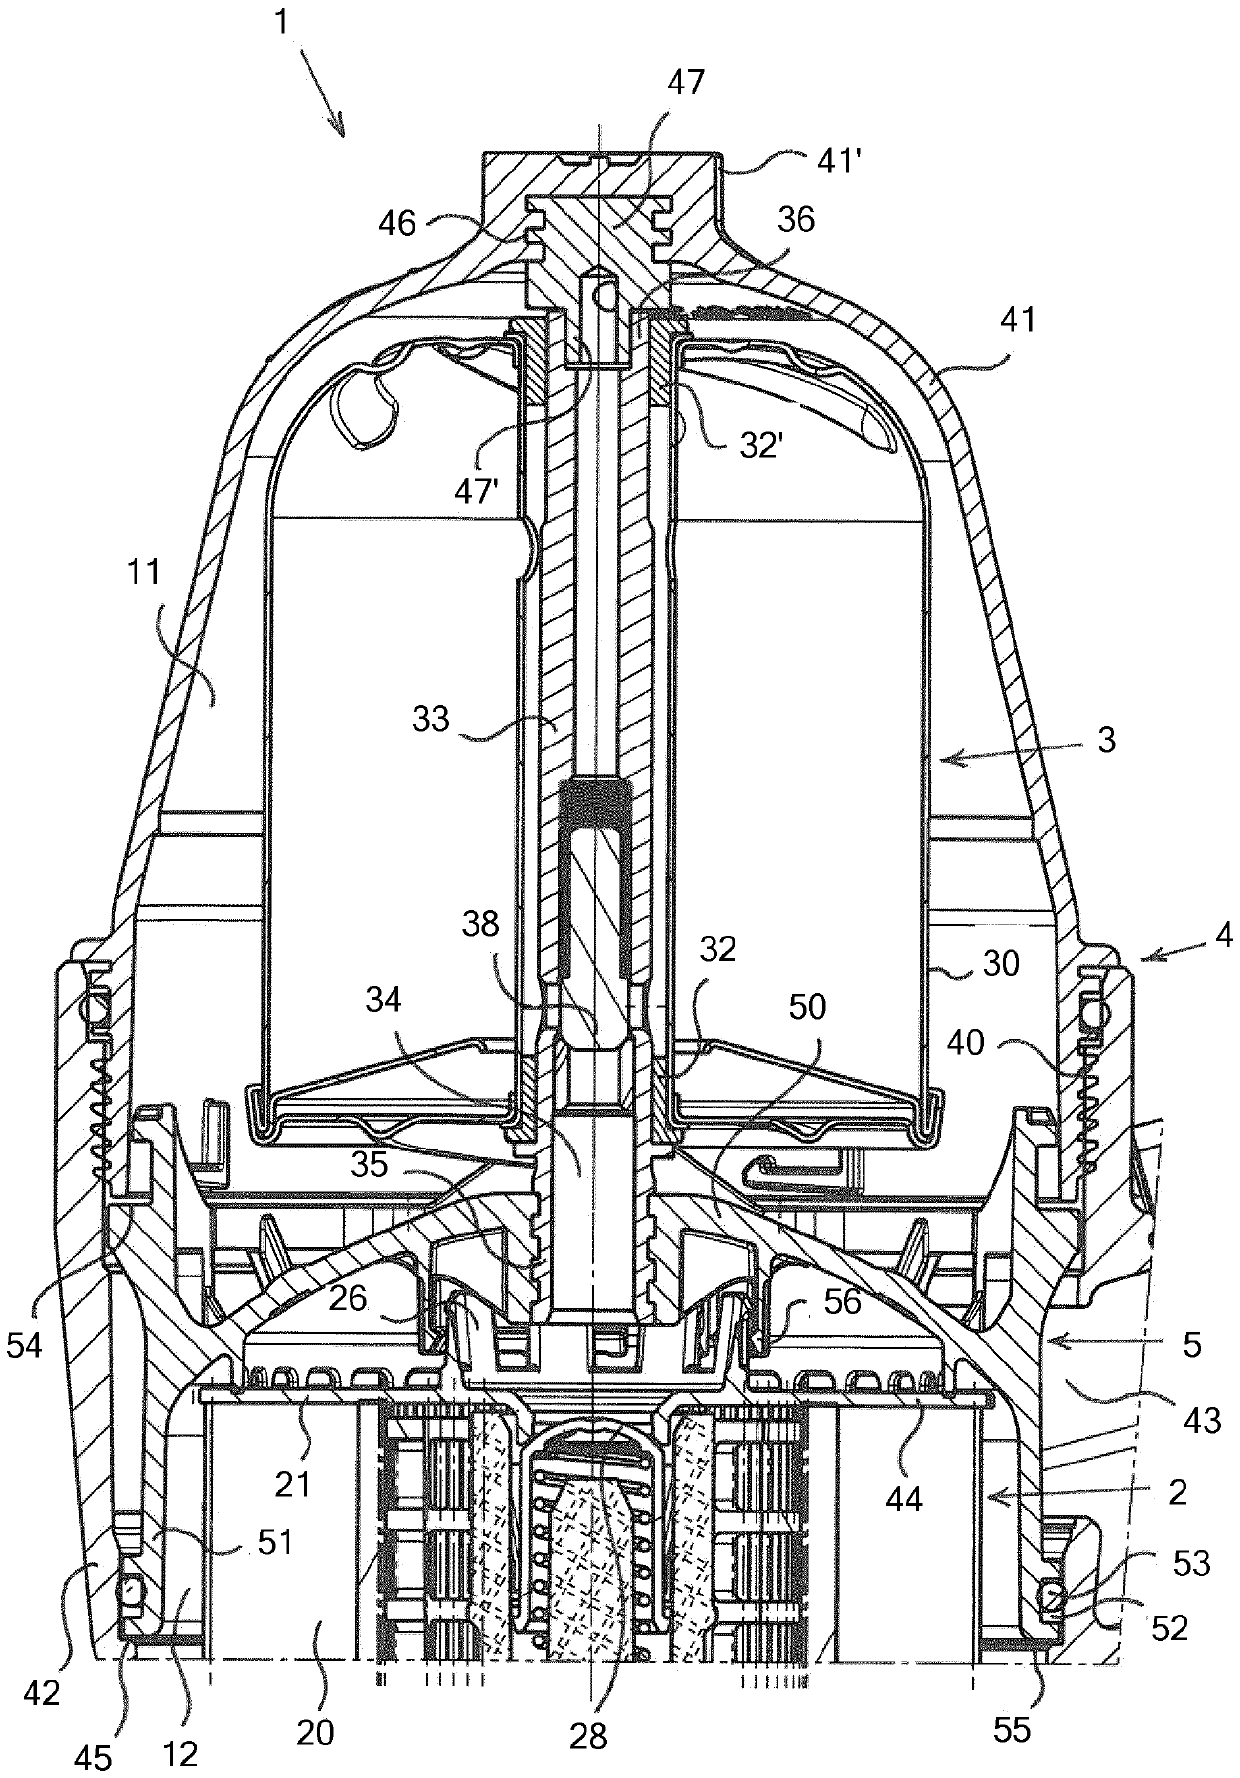 Device for removing impurities from the lubricating oil of an internal combustion engine